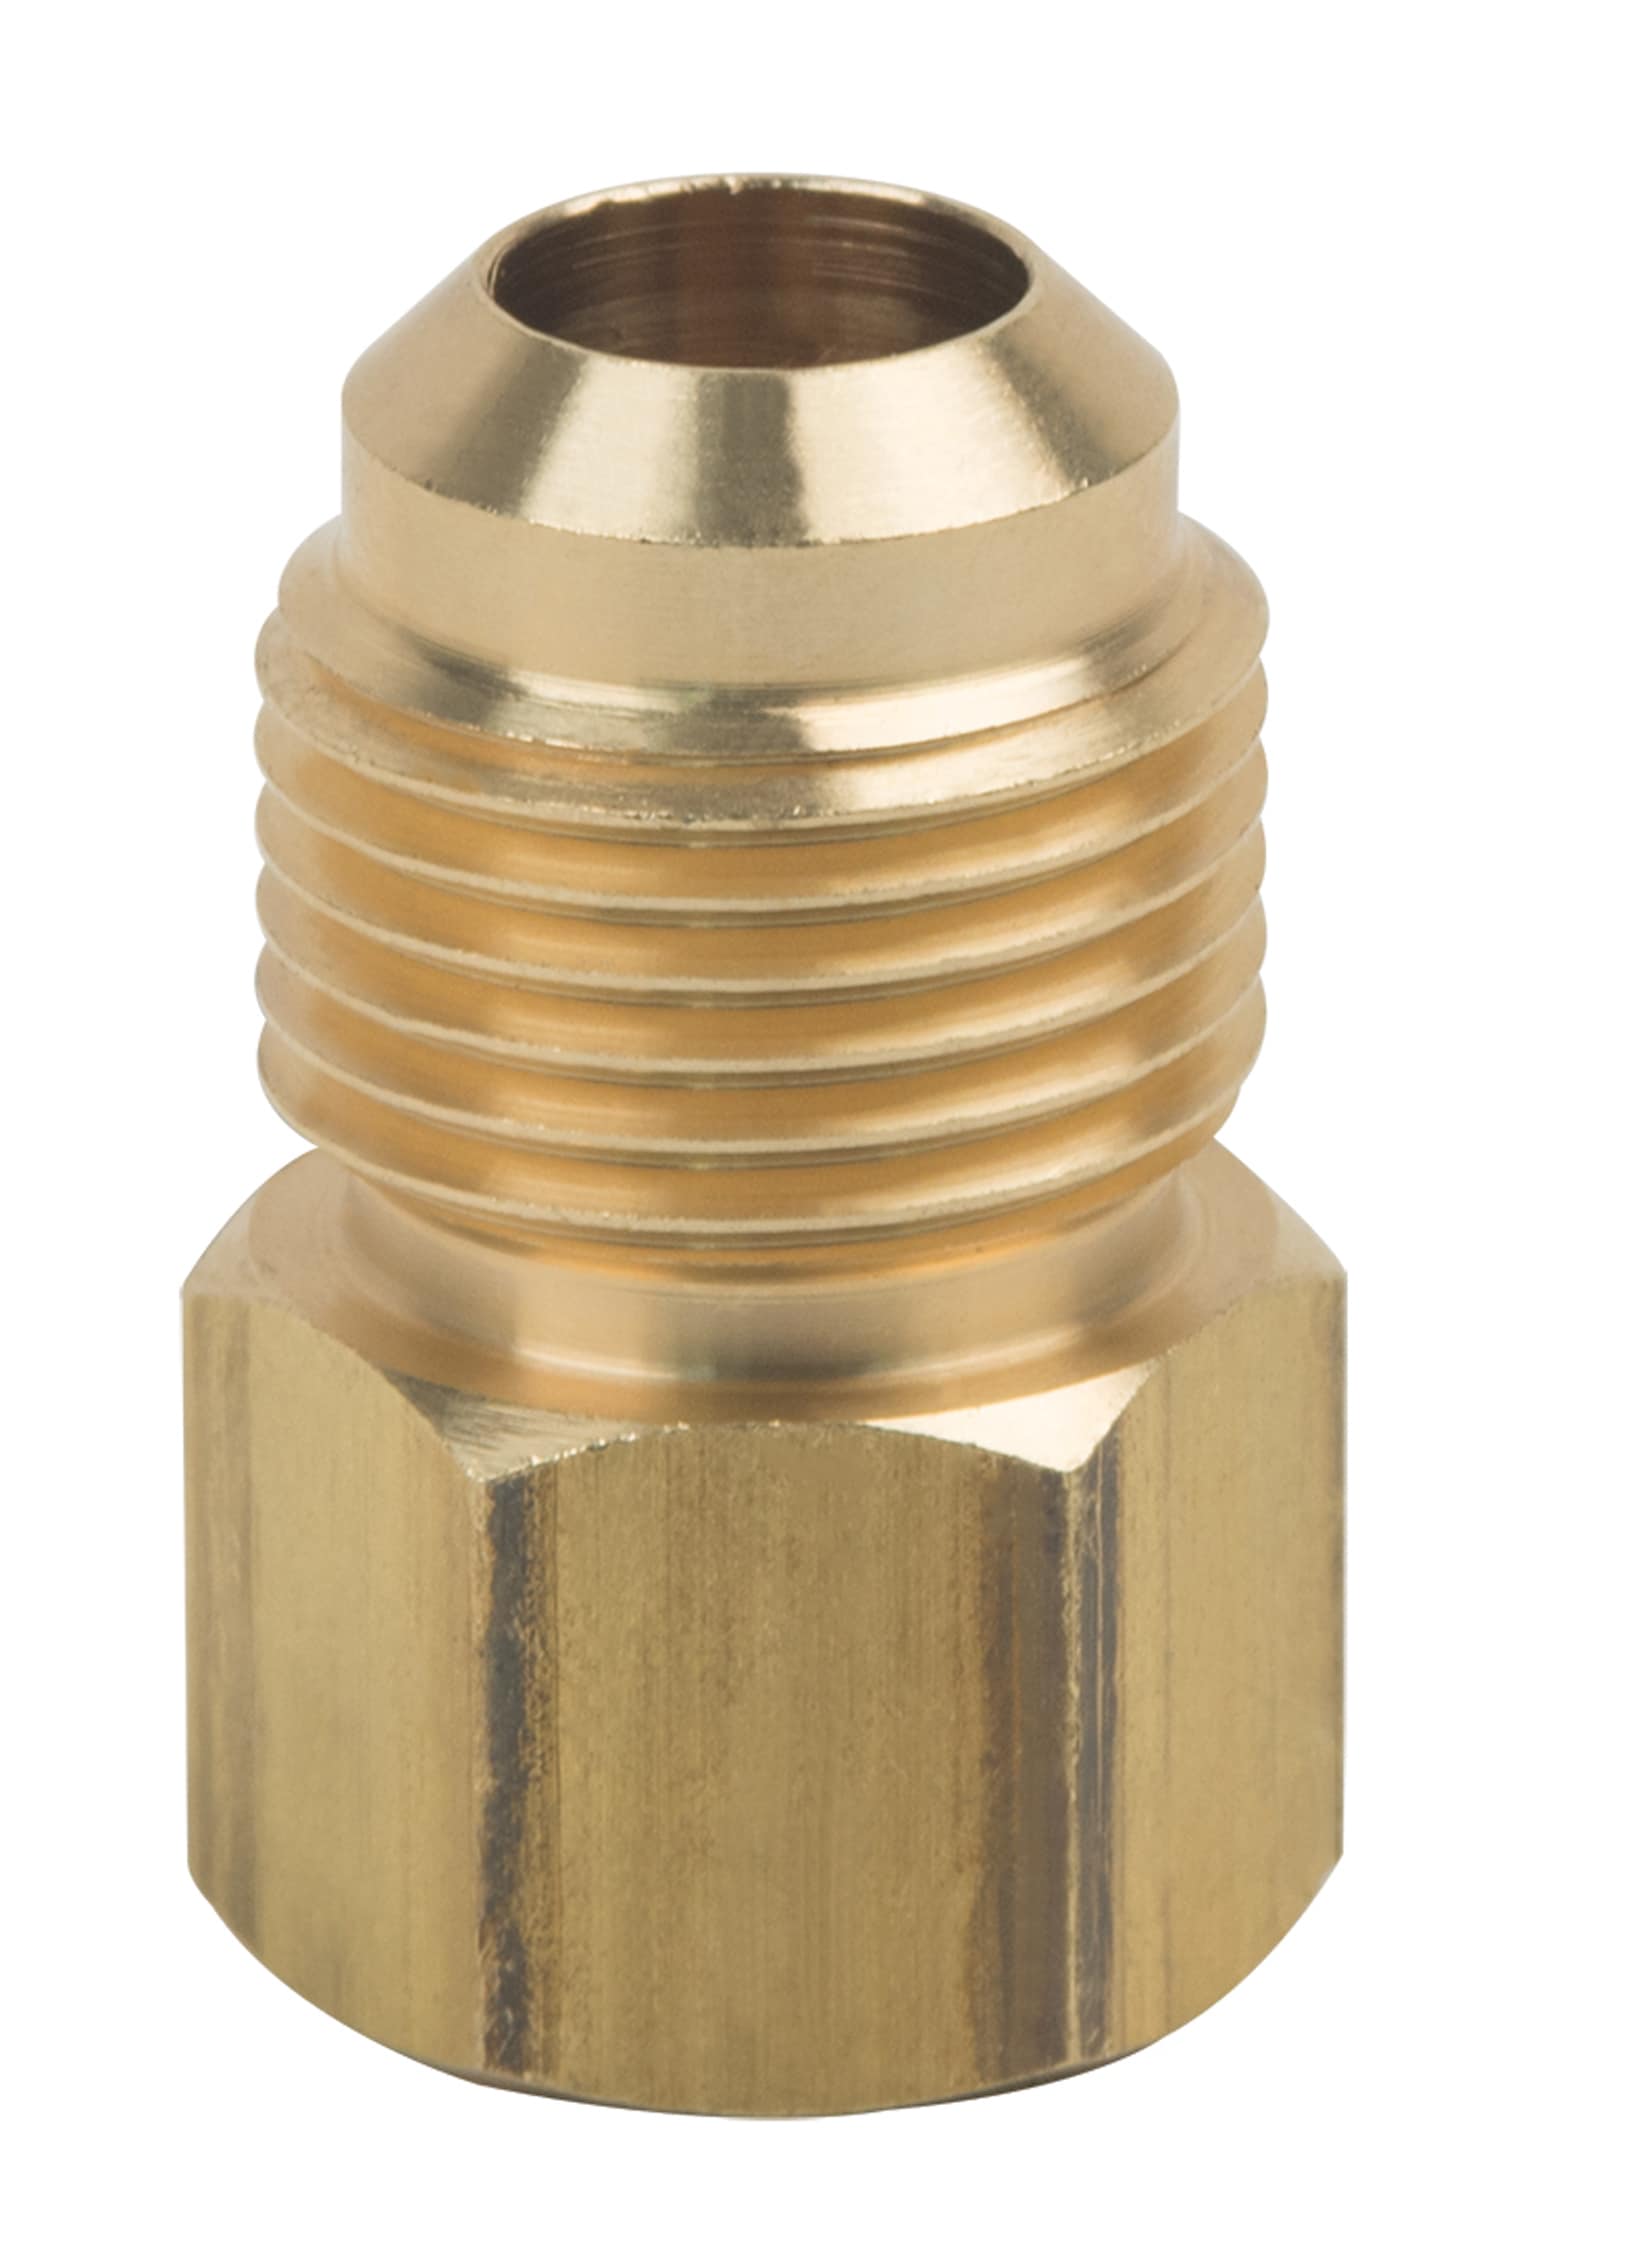 3/8 Coupling Brass Pipe Fitting NPT thread female adapter air fuel water gas 